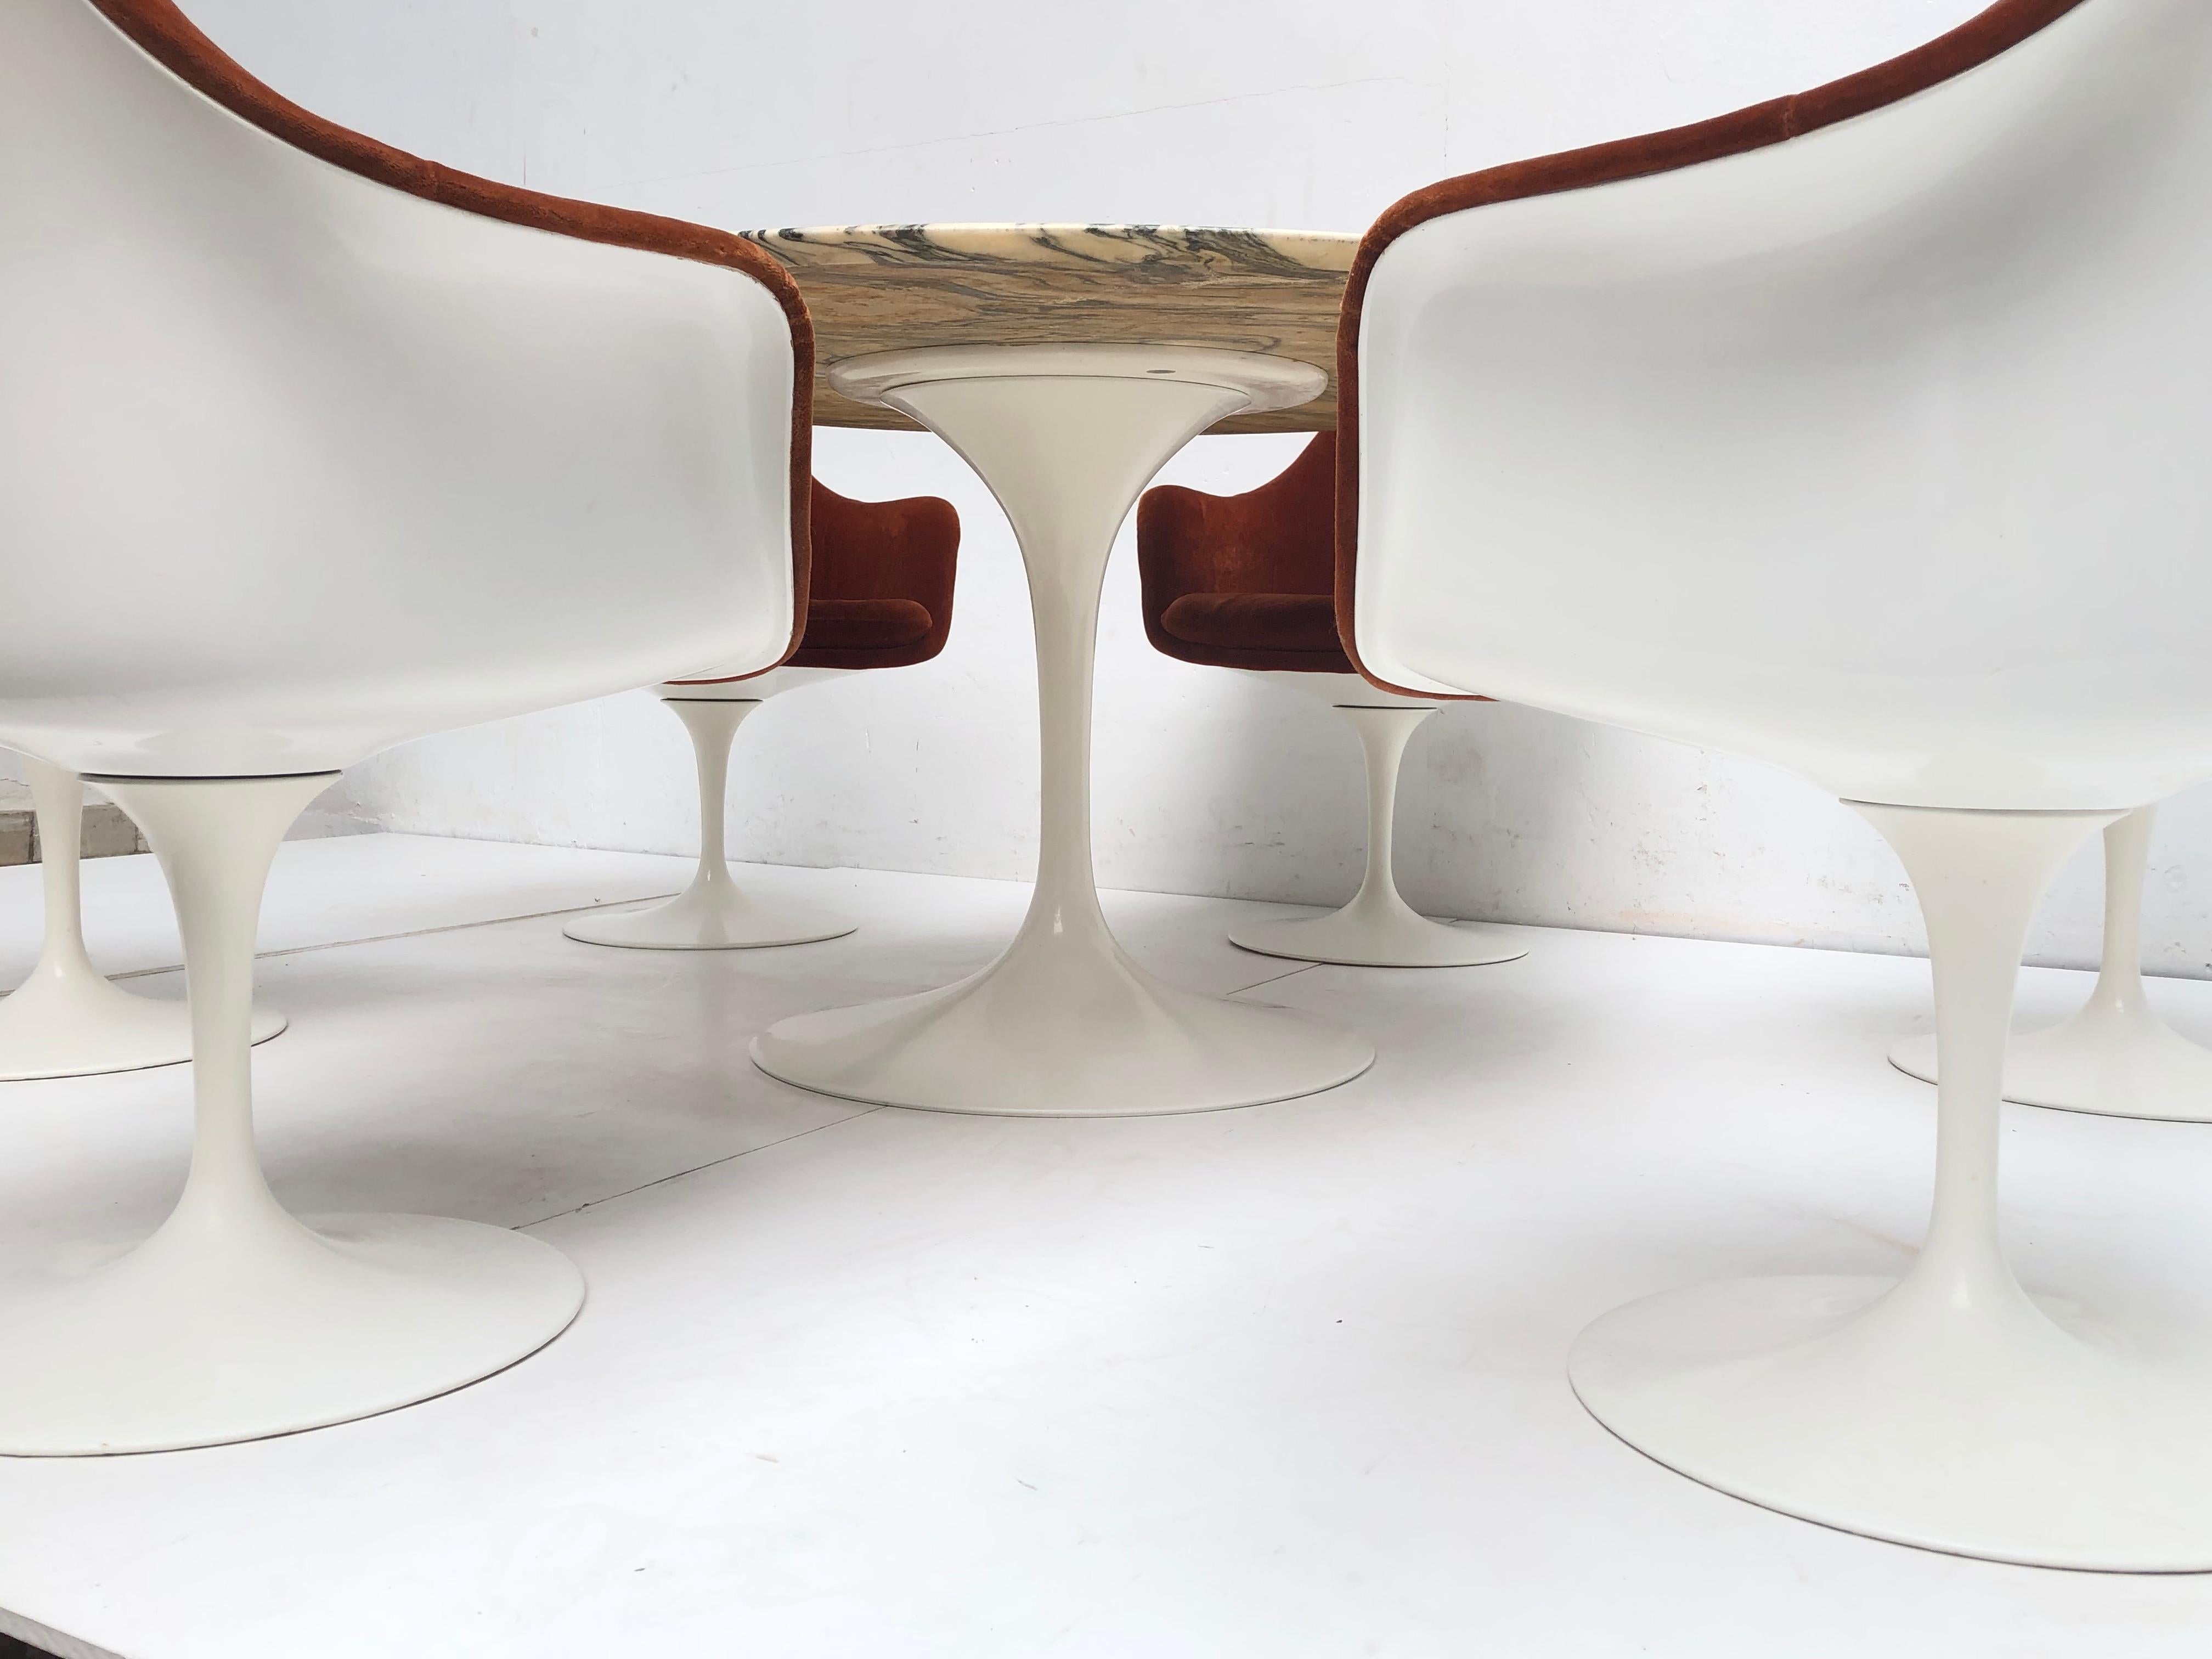 This amazing dining set by Eero Saarinen for Knoll is a survivor and is in great original as found vintage condition

The production date of this set is estimated 2-2-1984 based on the stamps in latex cushions

The table base is marked with